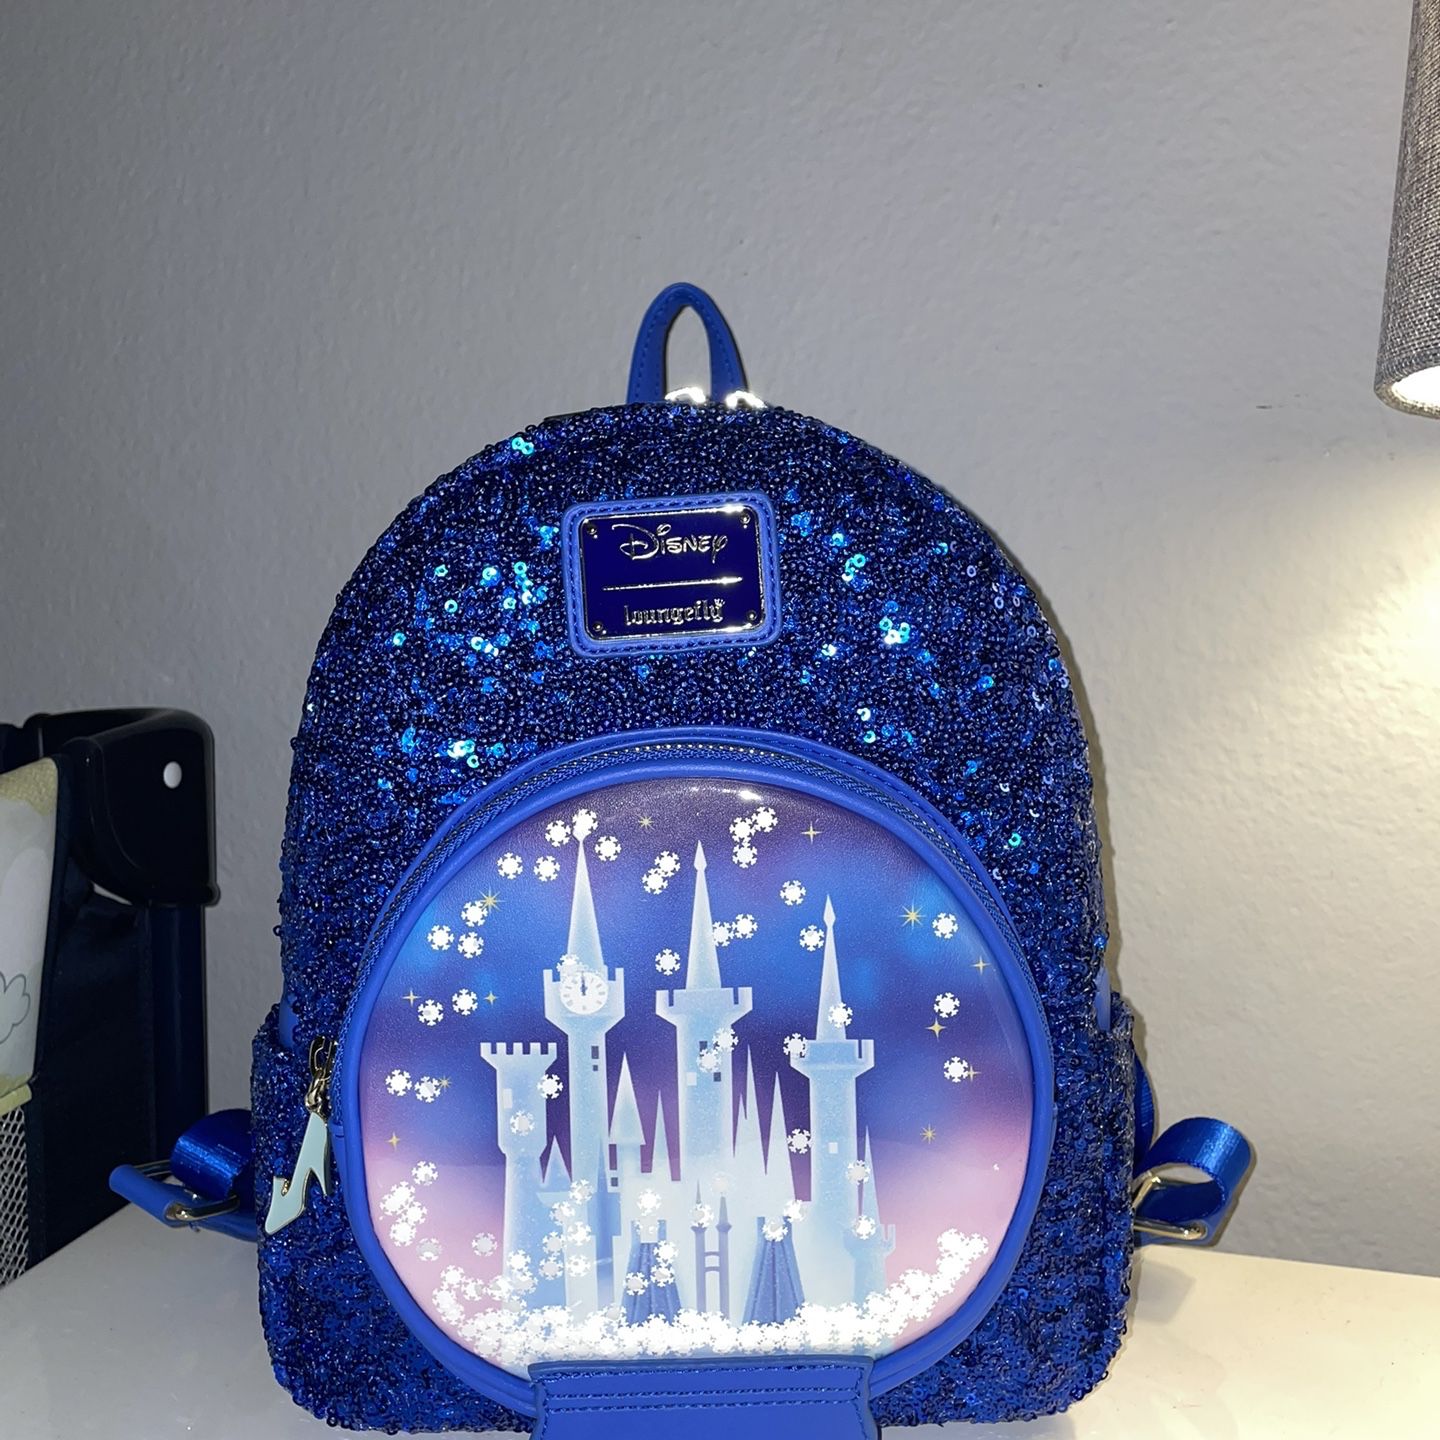 Aphmau backpack for Sale in Orlando, FL - OfferUp